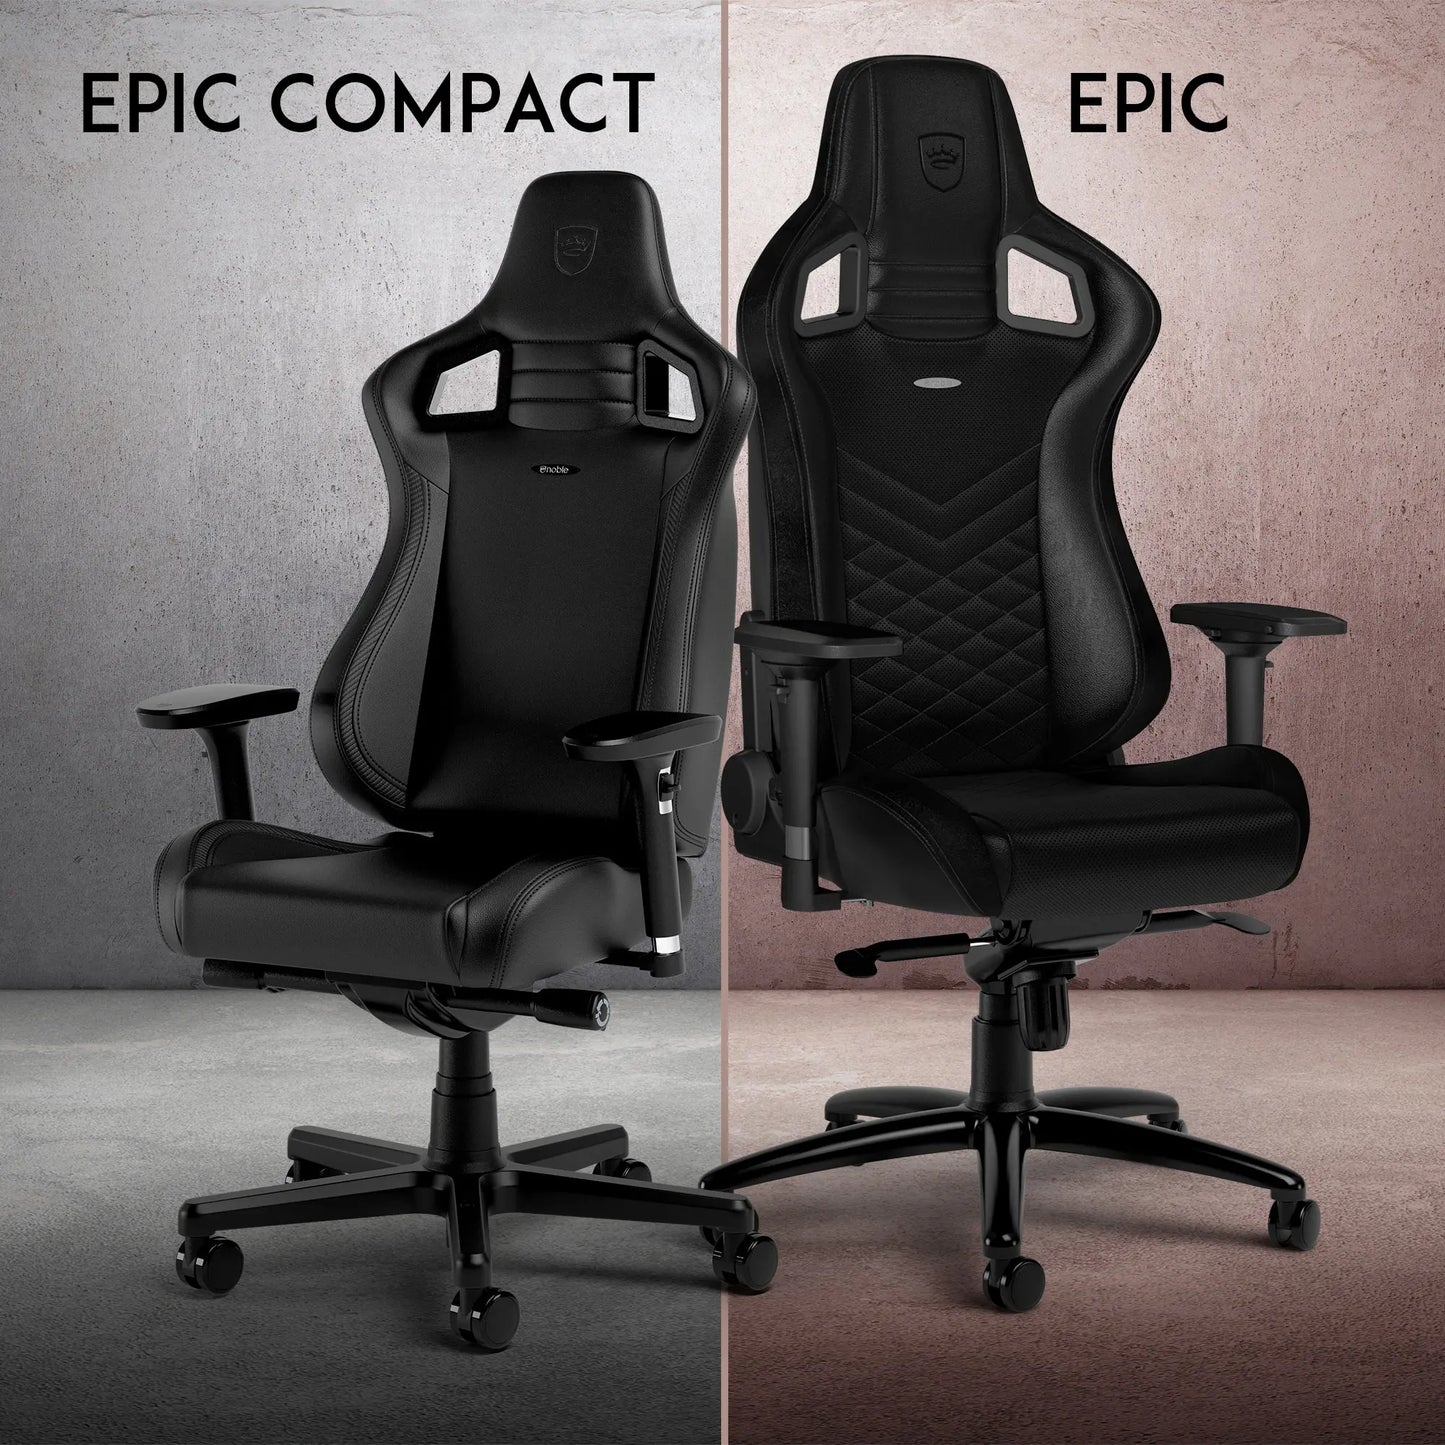 EPIC COMPACT